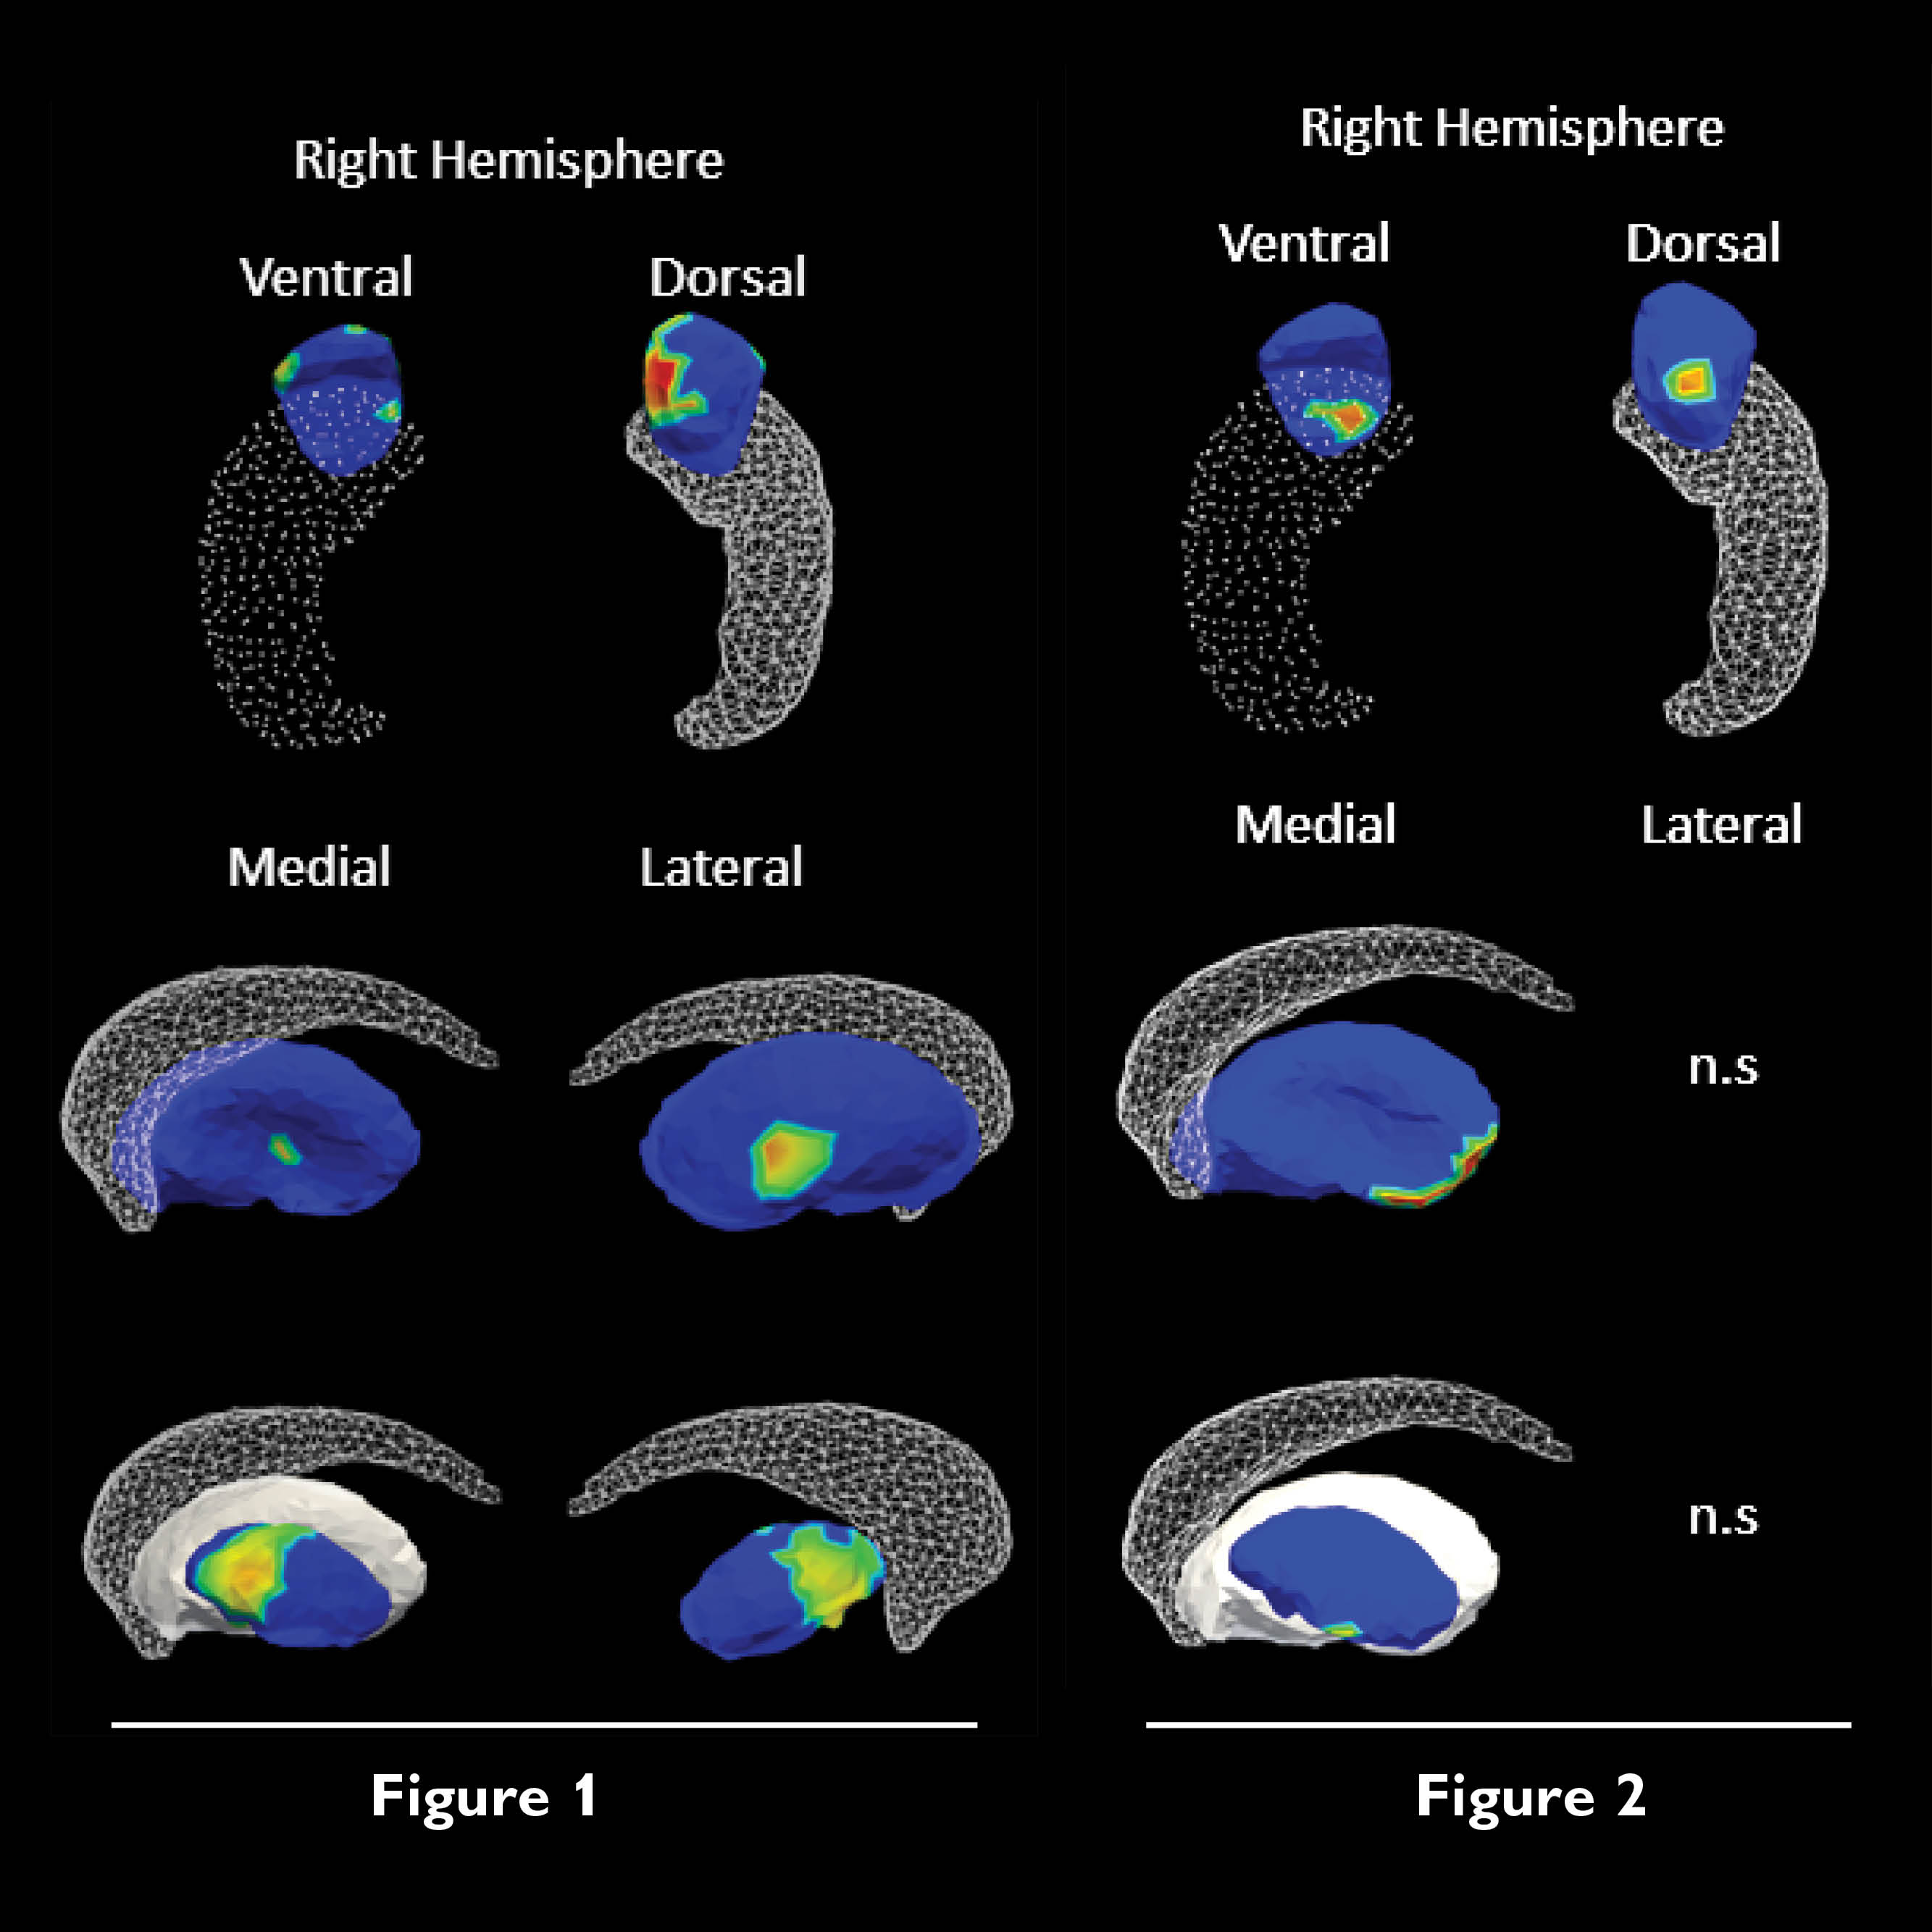 The image shows the shape compression of various structures in the brain related to emotion regulation in ADHD compared with typically developing boys and the brain-behavior correlations for ADHD boys between emotion dysregulation and regions of expansion on the amygdala, putamen and globus pallidus. 